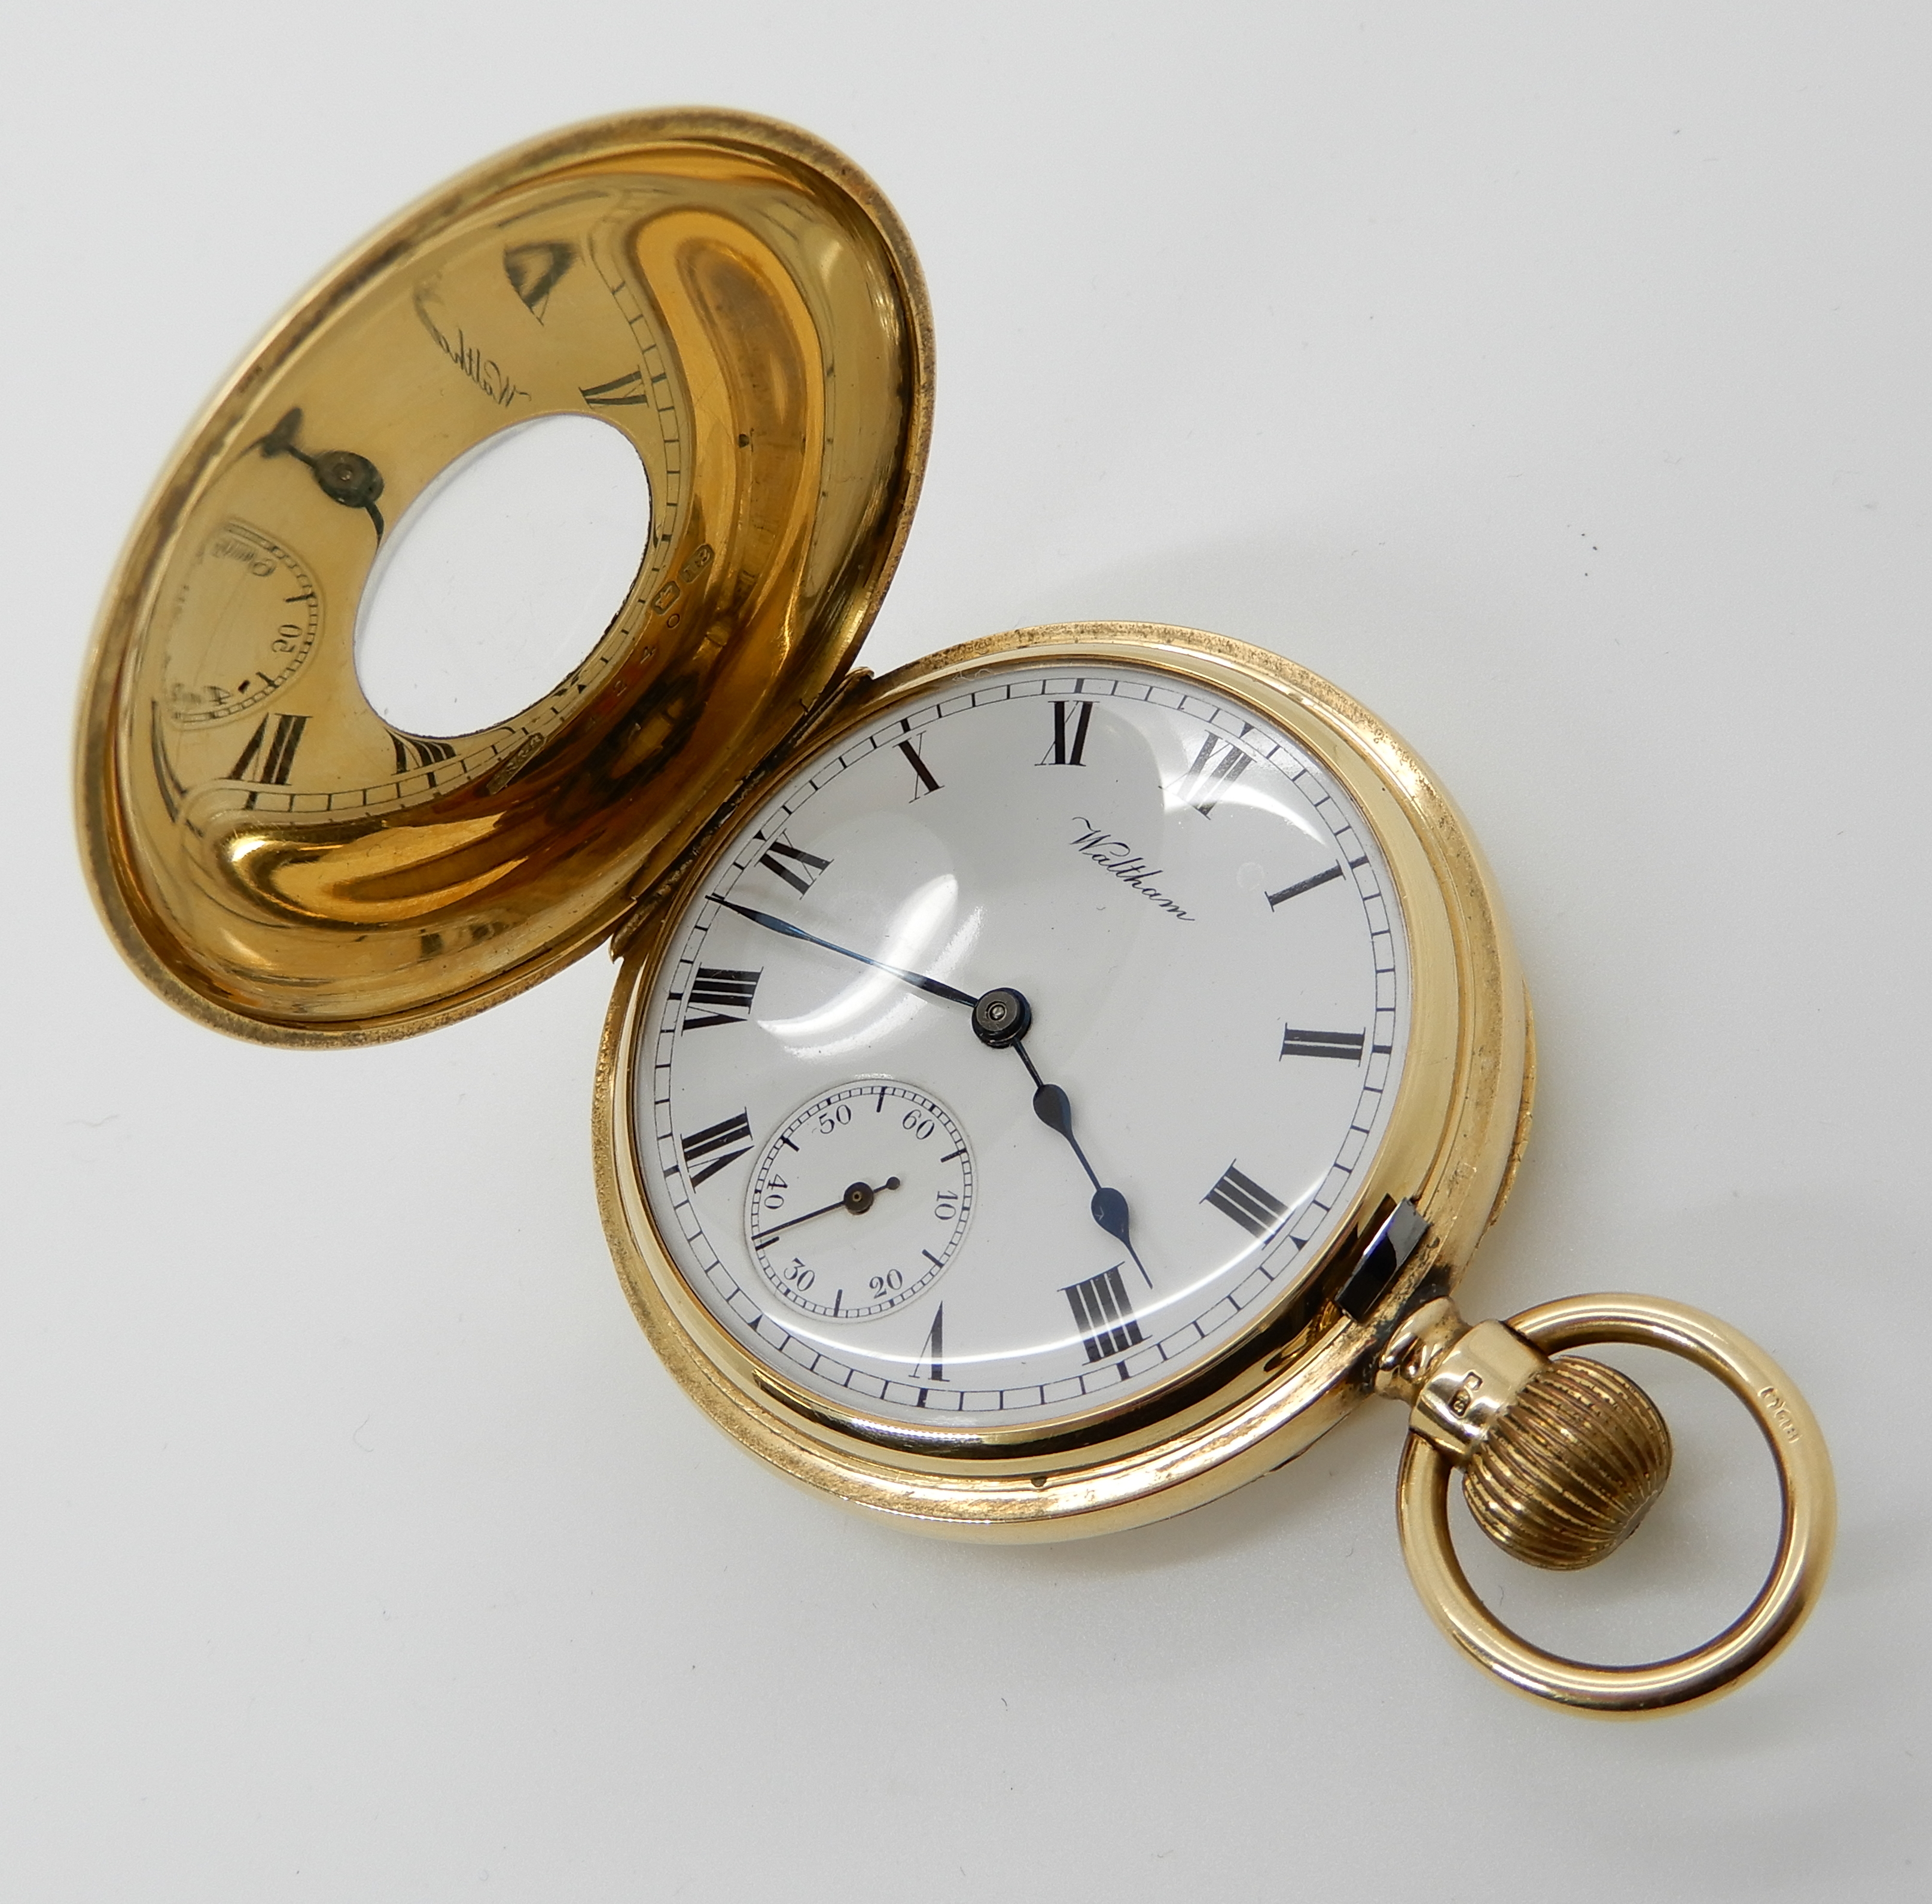 AN 18CT GOLD WALTHAM HALF HUNTER POCKET WATCH with white enamel dial, black Roman numerals, - Image 2 of 6